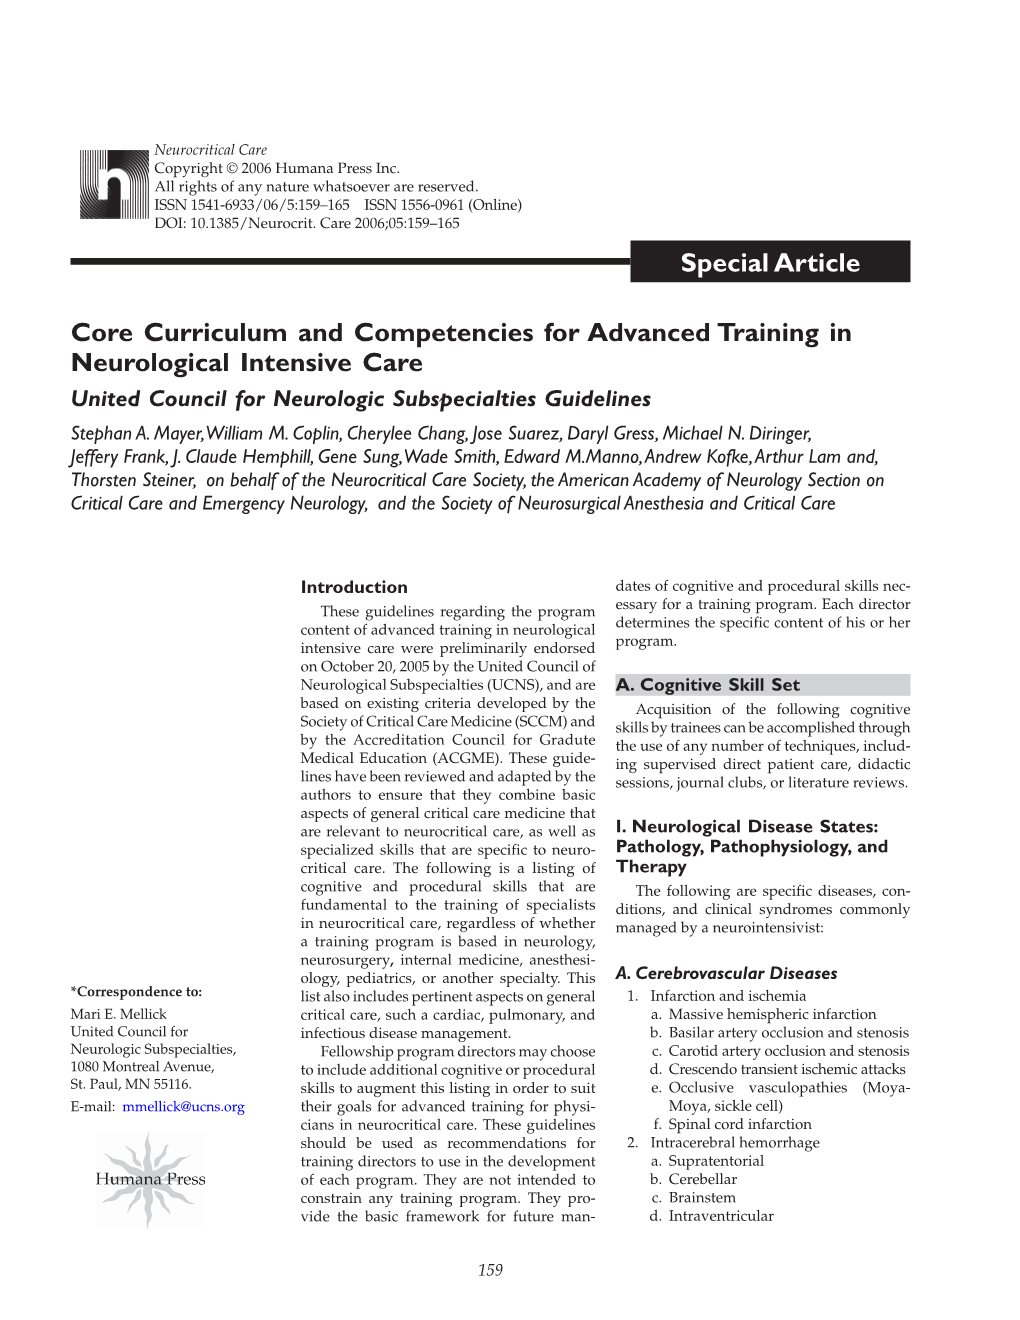 Core Curriculum and Competencies for Advanced Training in Neurological Intensive Care United Council for Neurologic Subspecialties Guidelines Stephan A